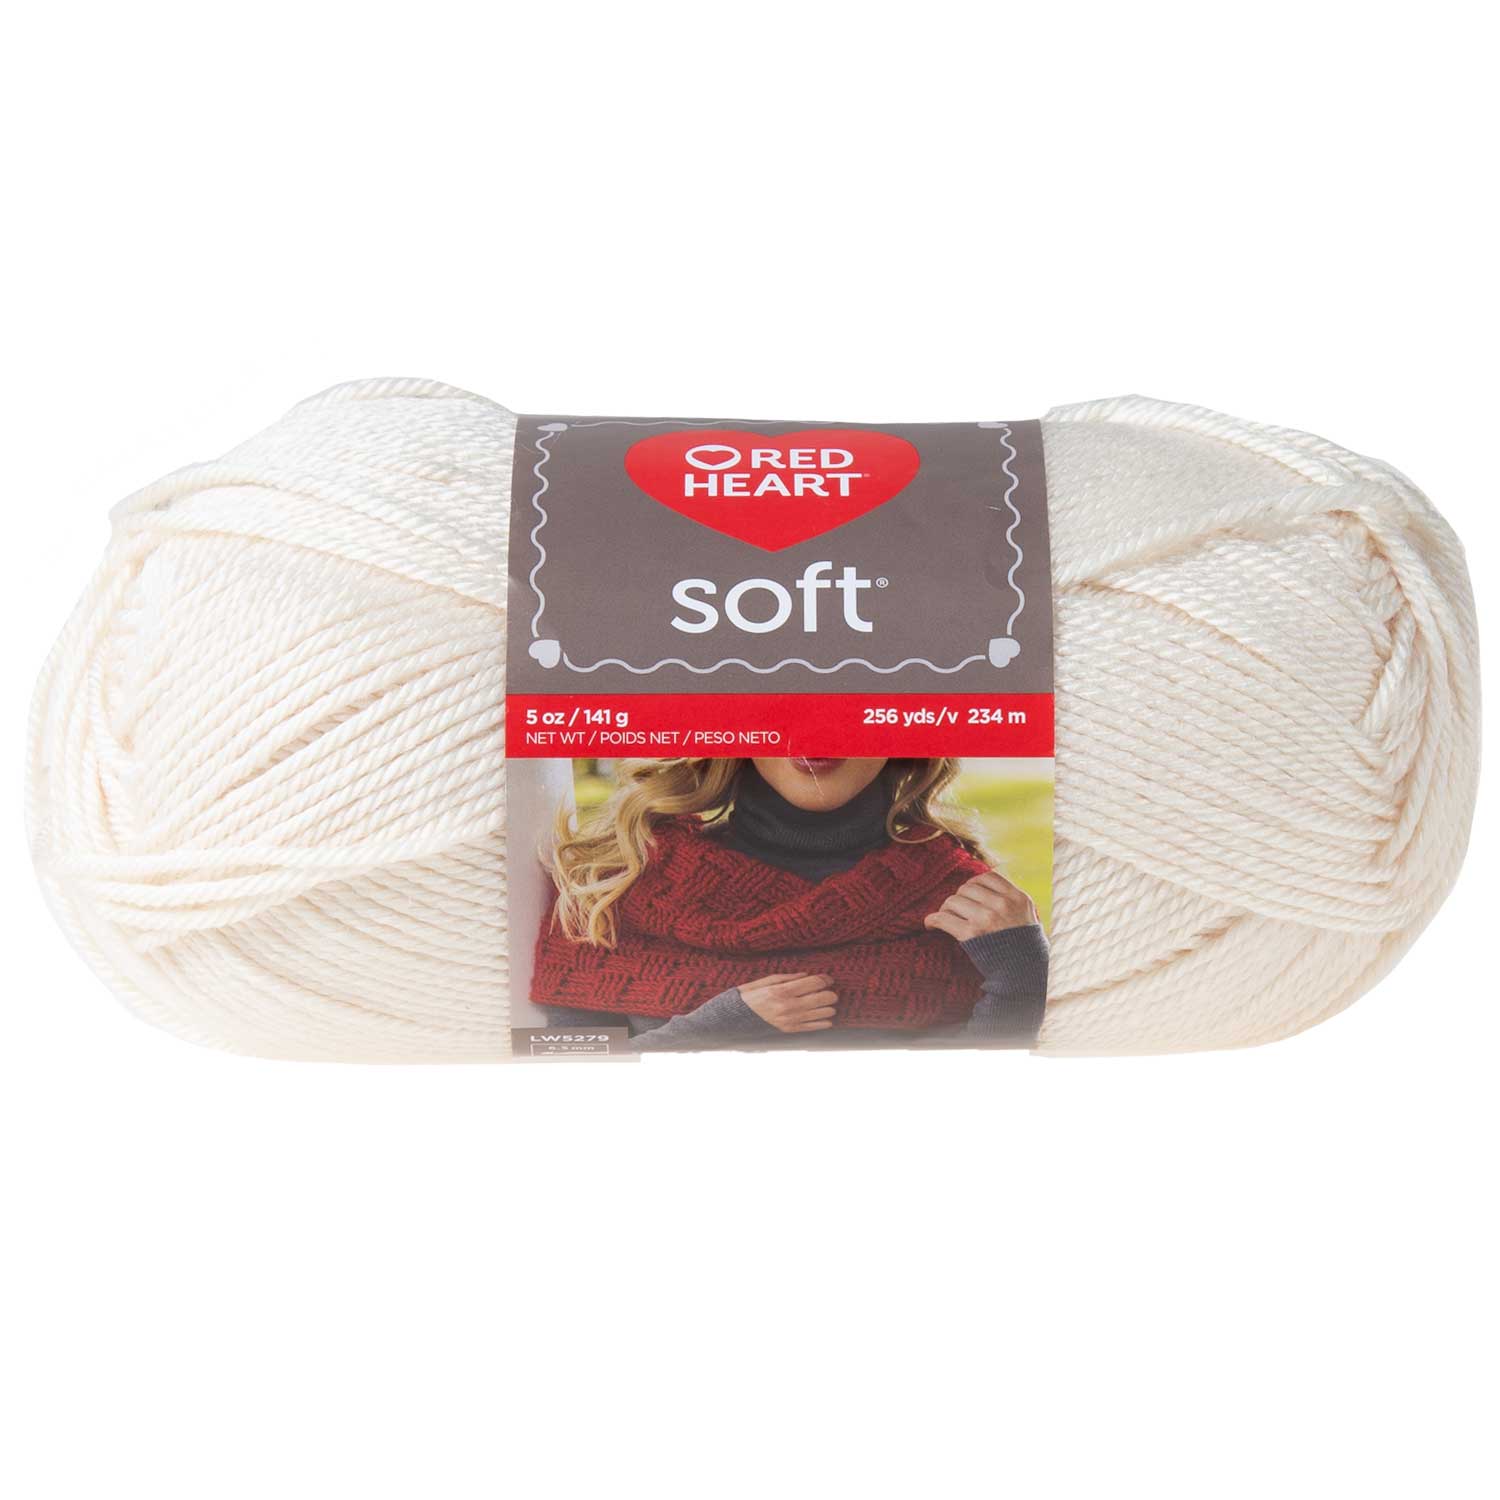 Red Heart Soft - Yarn, off-white